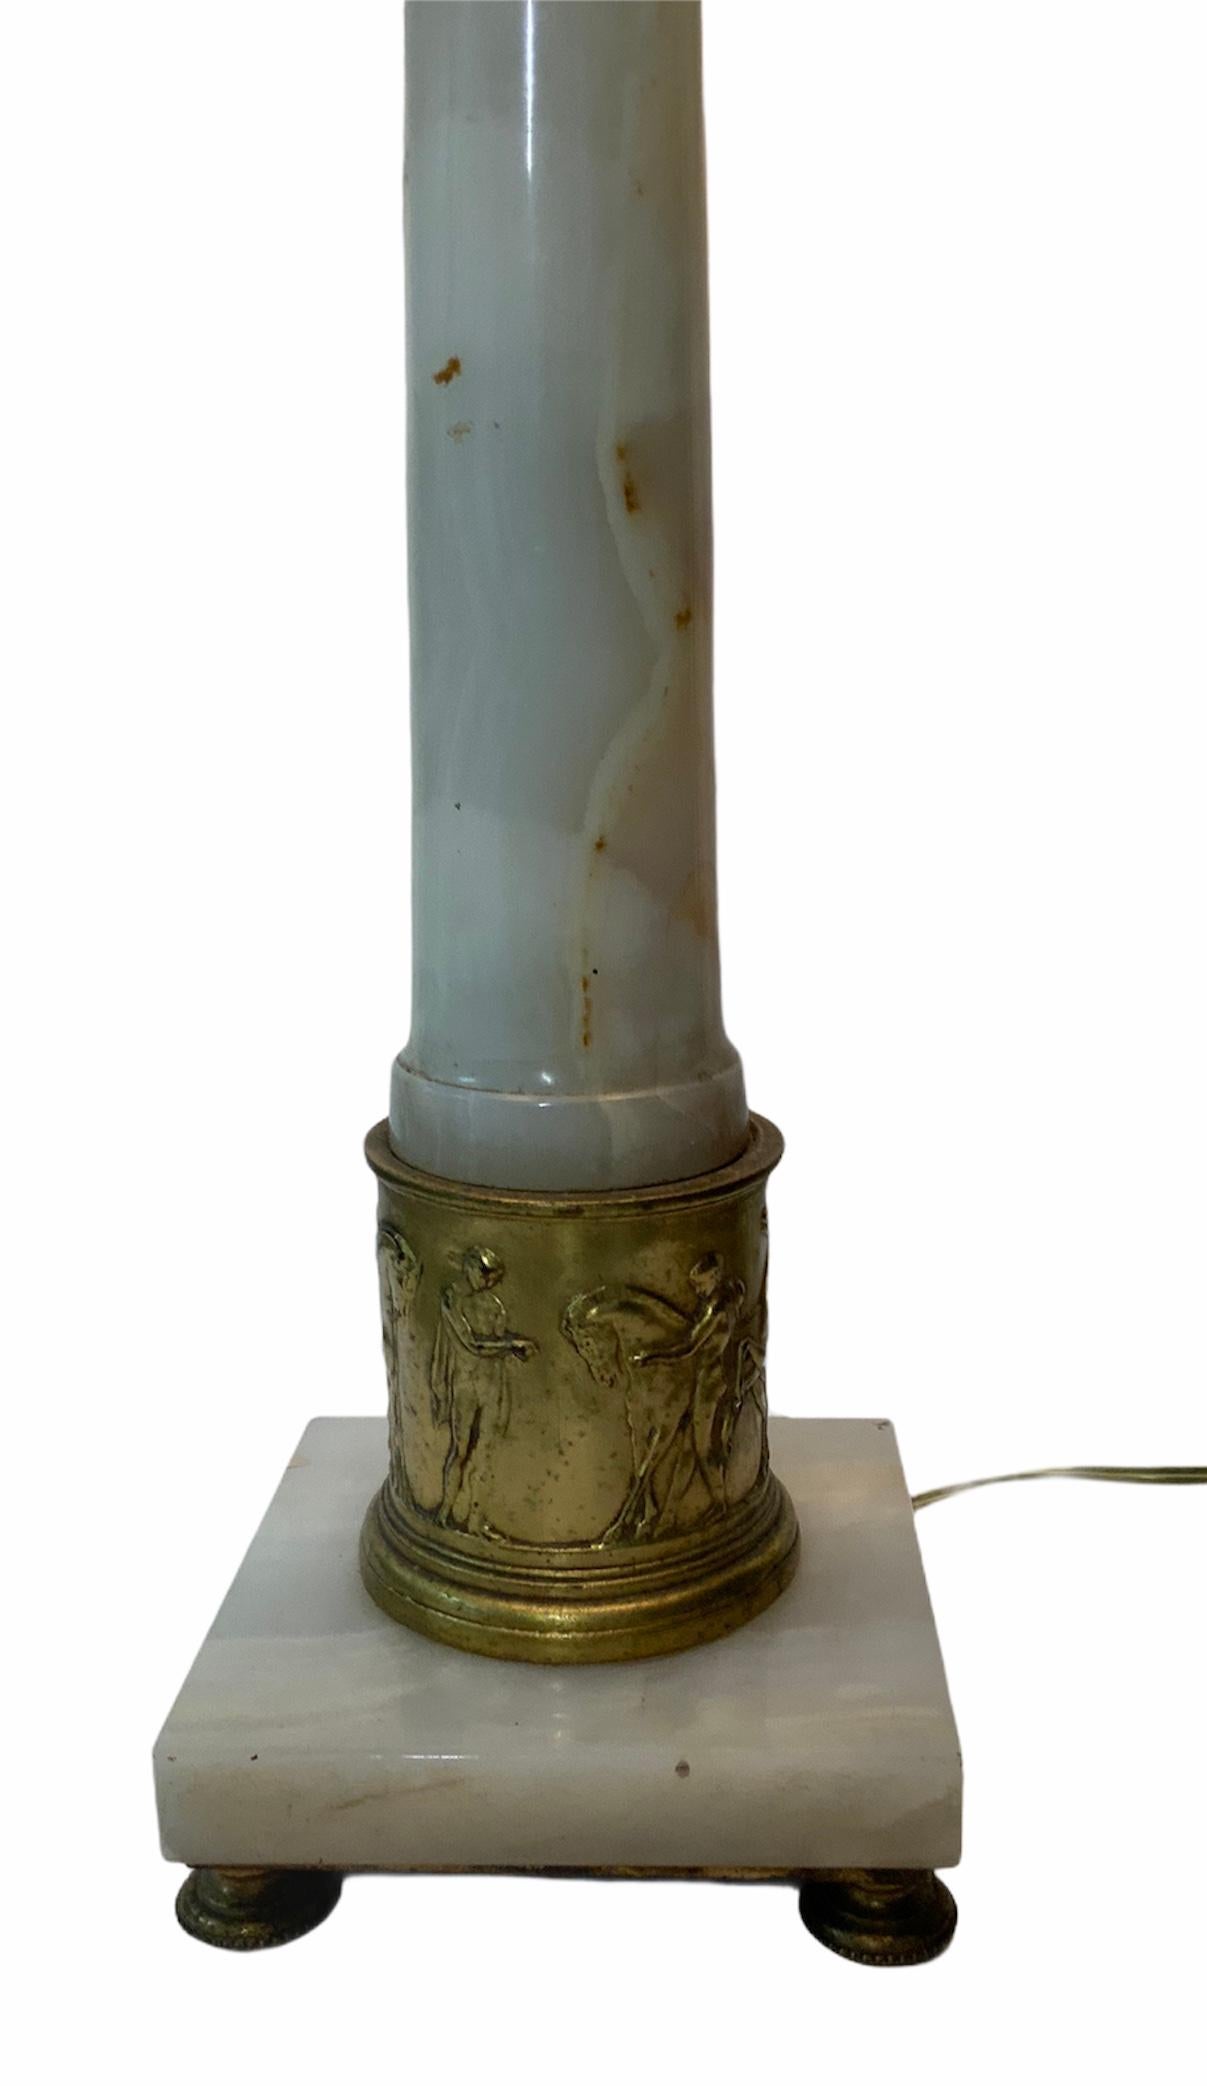 A translucent white alabaster with brown “veins” lamp build as an ascending column adorned with a bronze carved shell urn vase in the top and at the bottom a repousse bronze scene of Roman soldiers training horses. It stands in a square alabaster